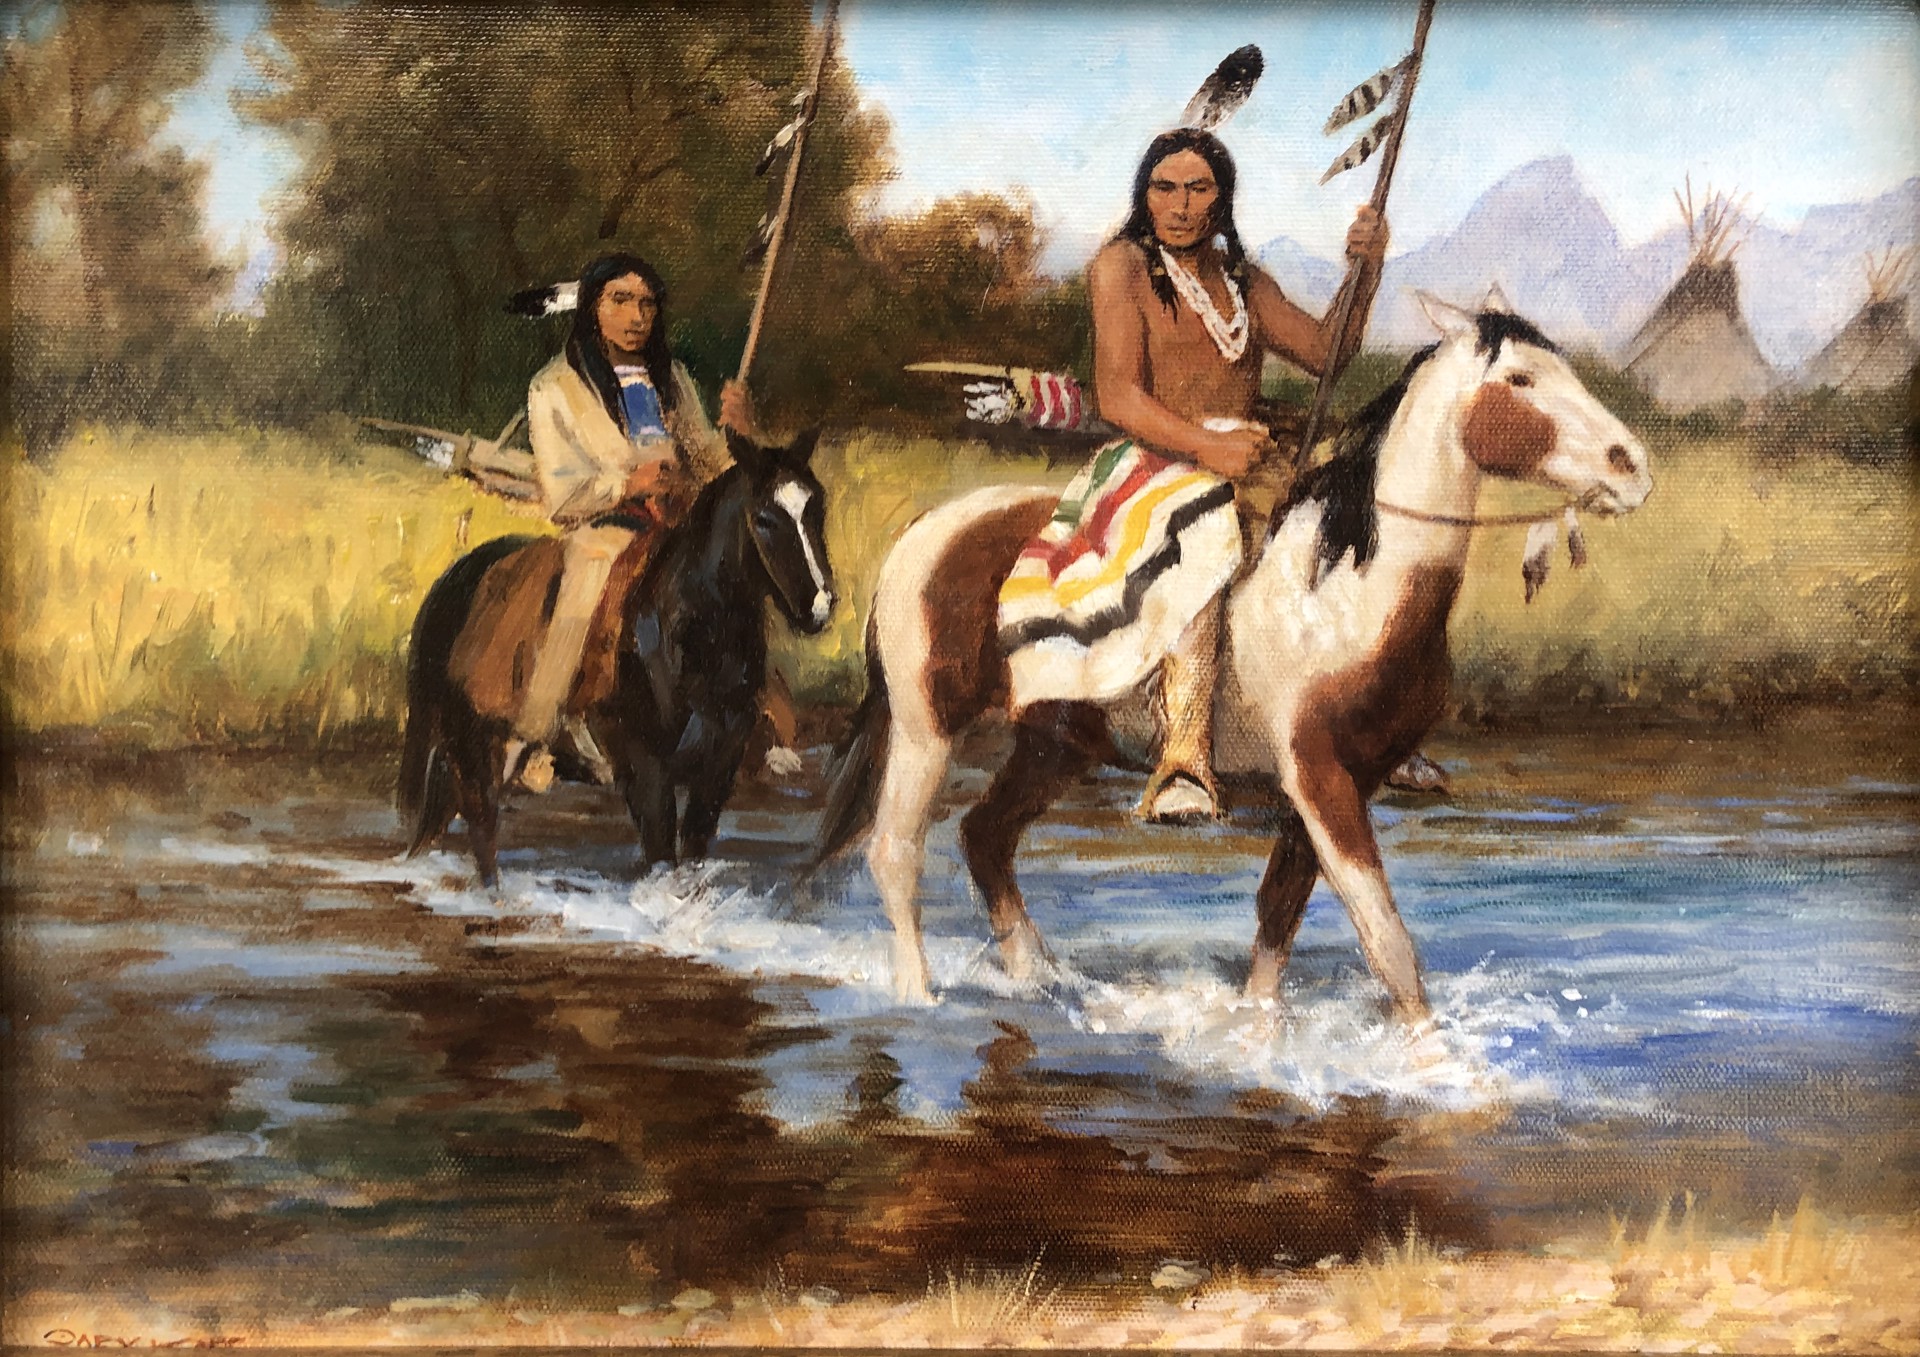 The River Crossing by Gary Kapp